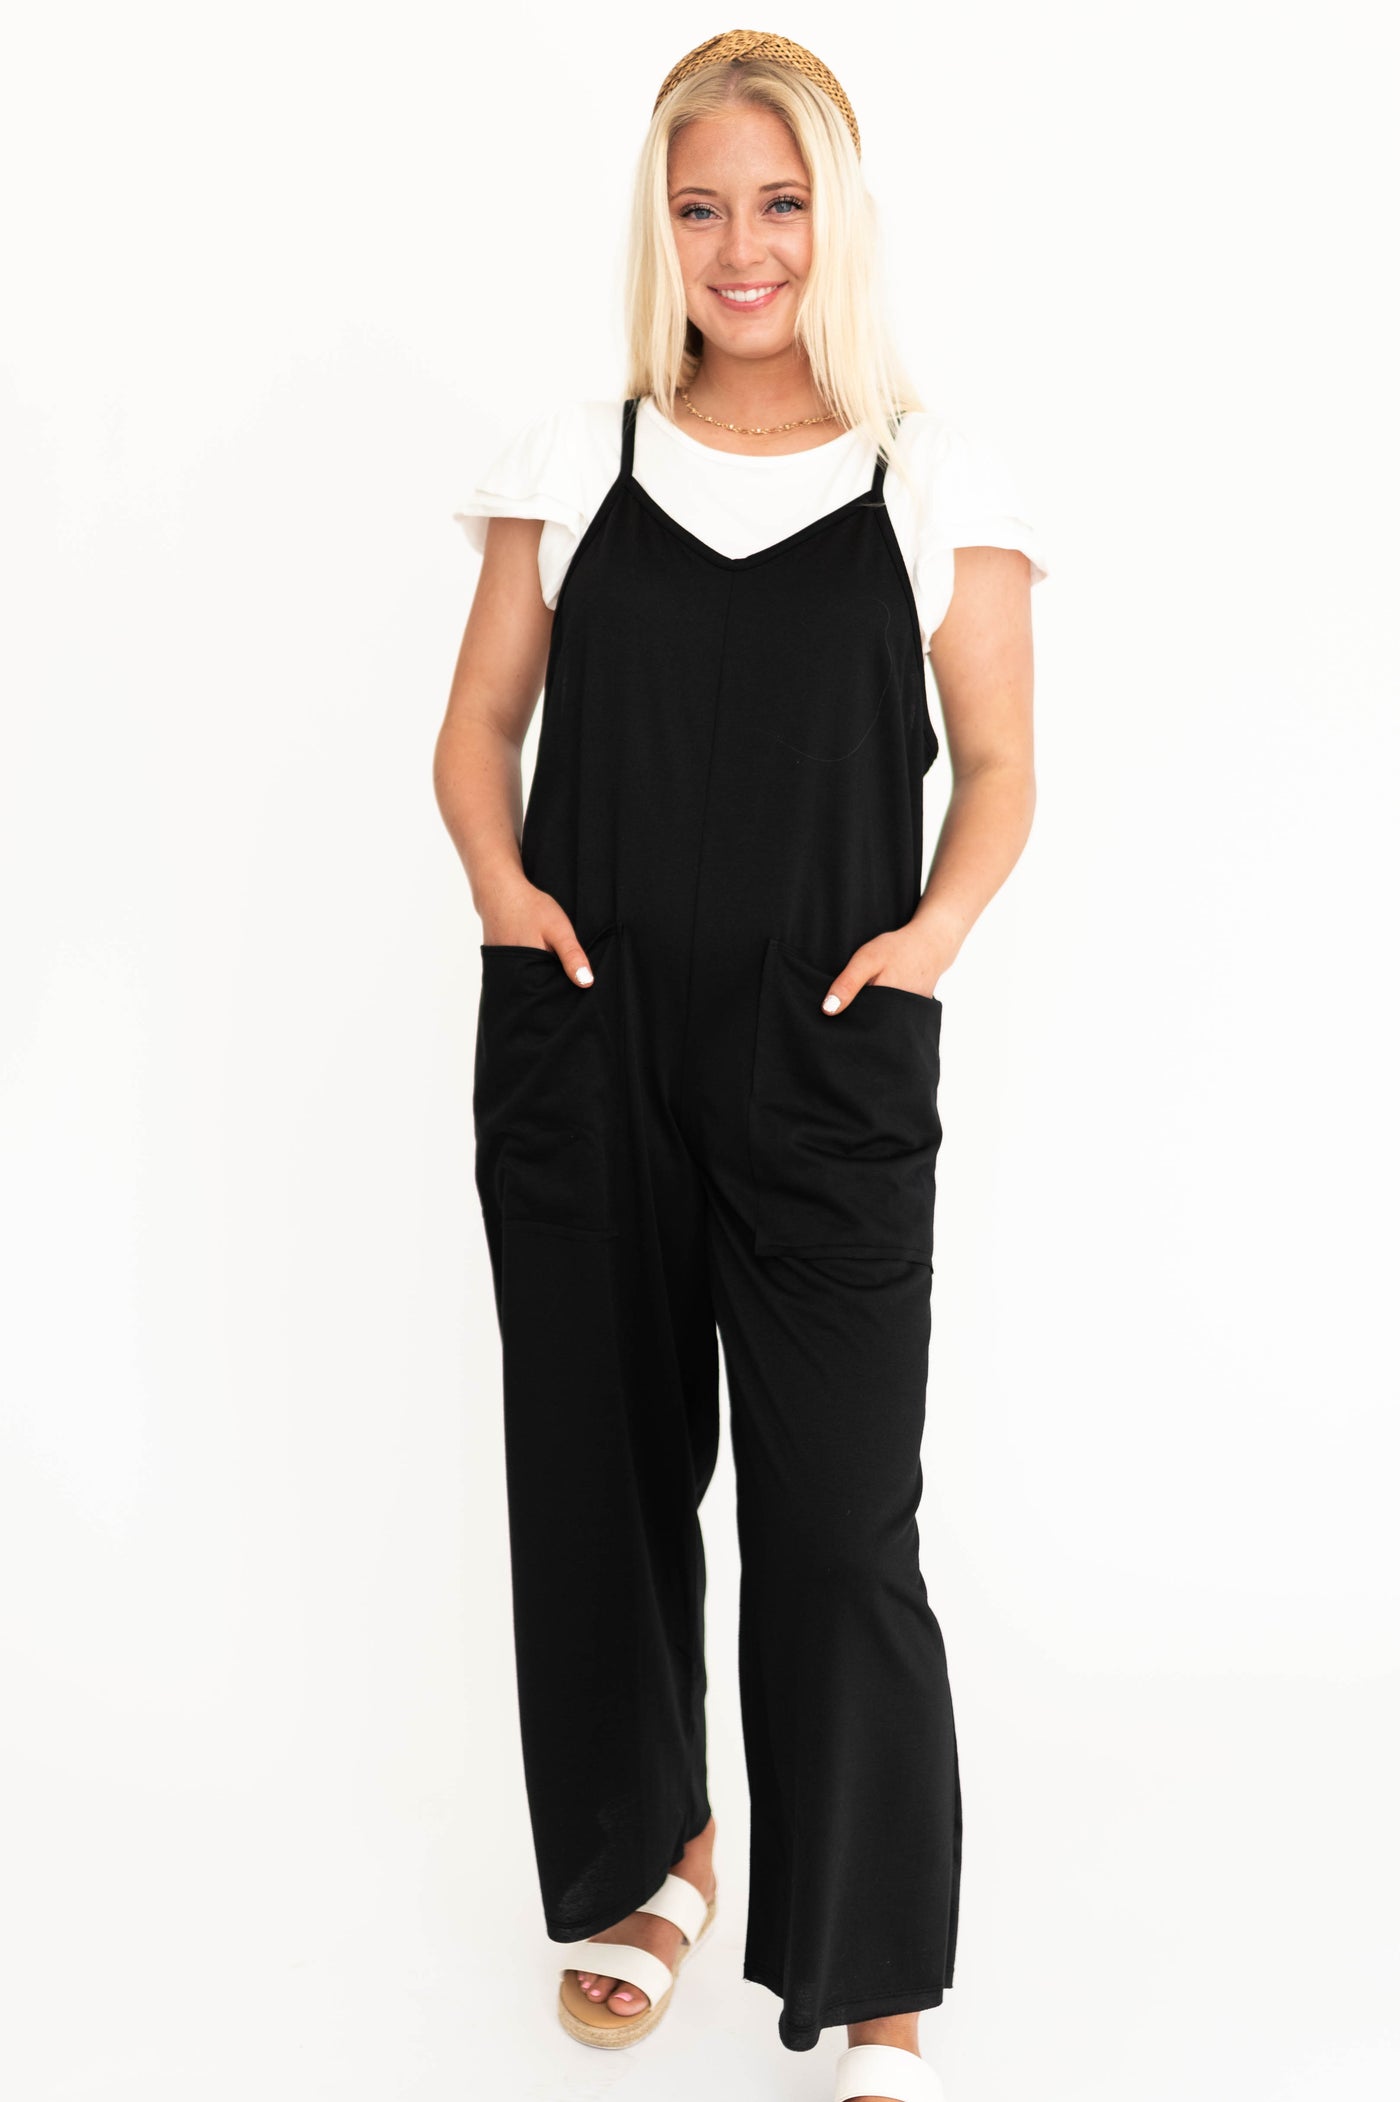 Black jumpsuit with pockets